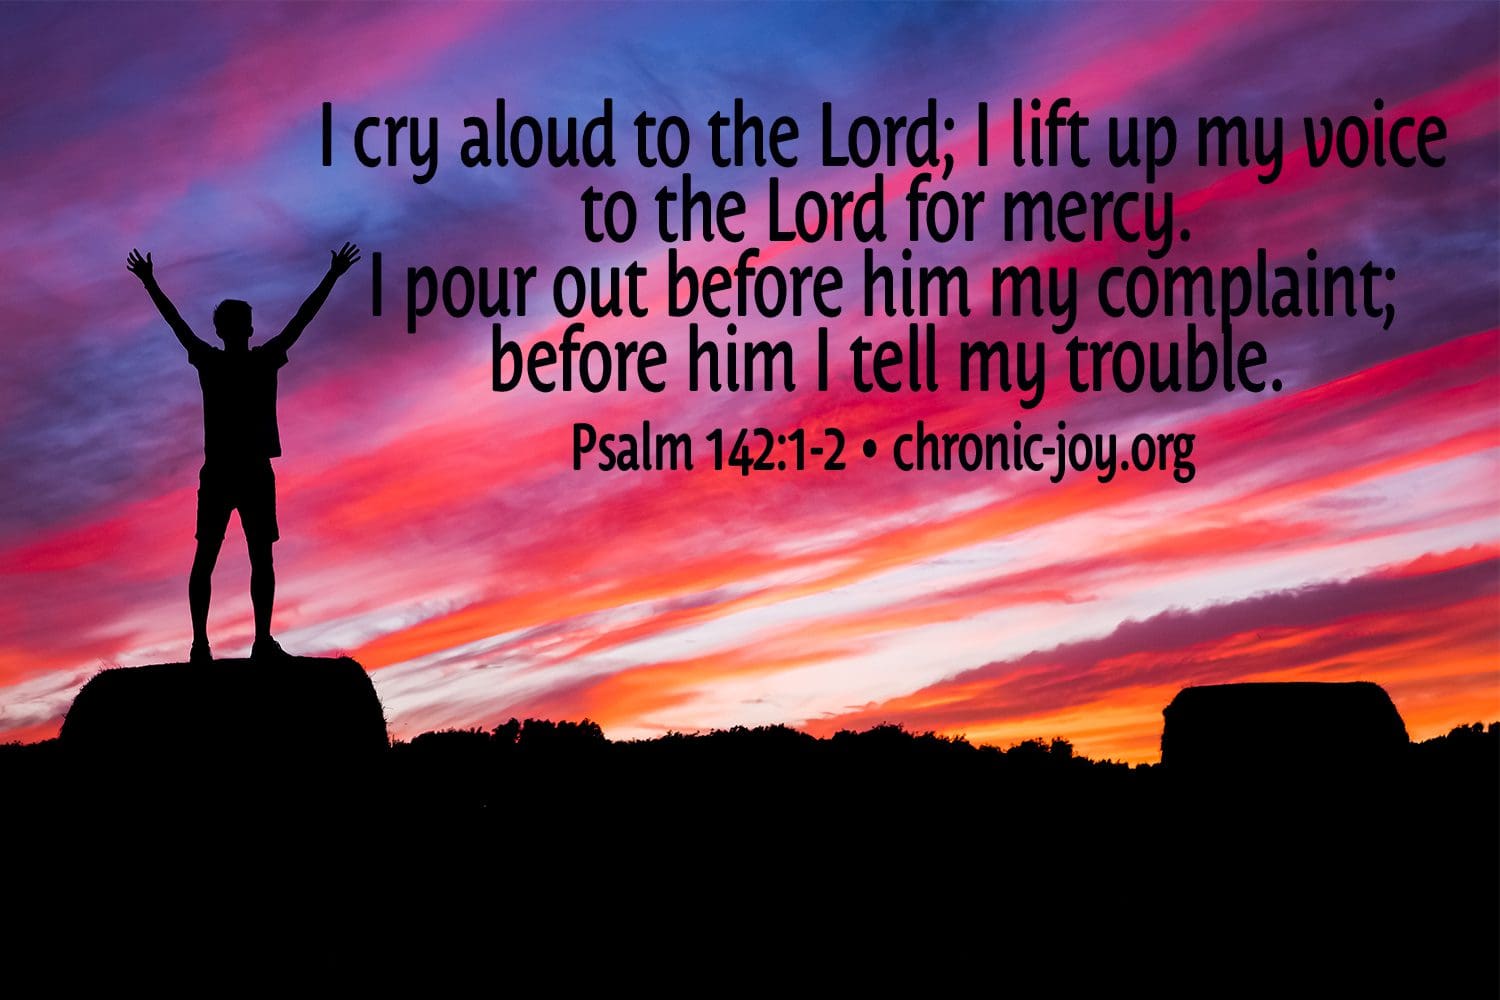 "I cry aloud to the Lord; I lift up my voice to the Lord for mercy. I pour out before him my complaint; before him I tell my trouble." Psalm 142:1-2